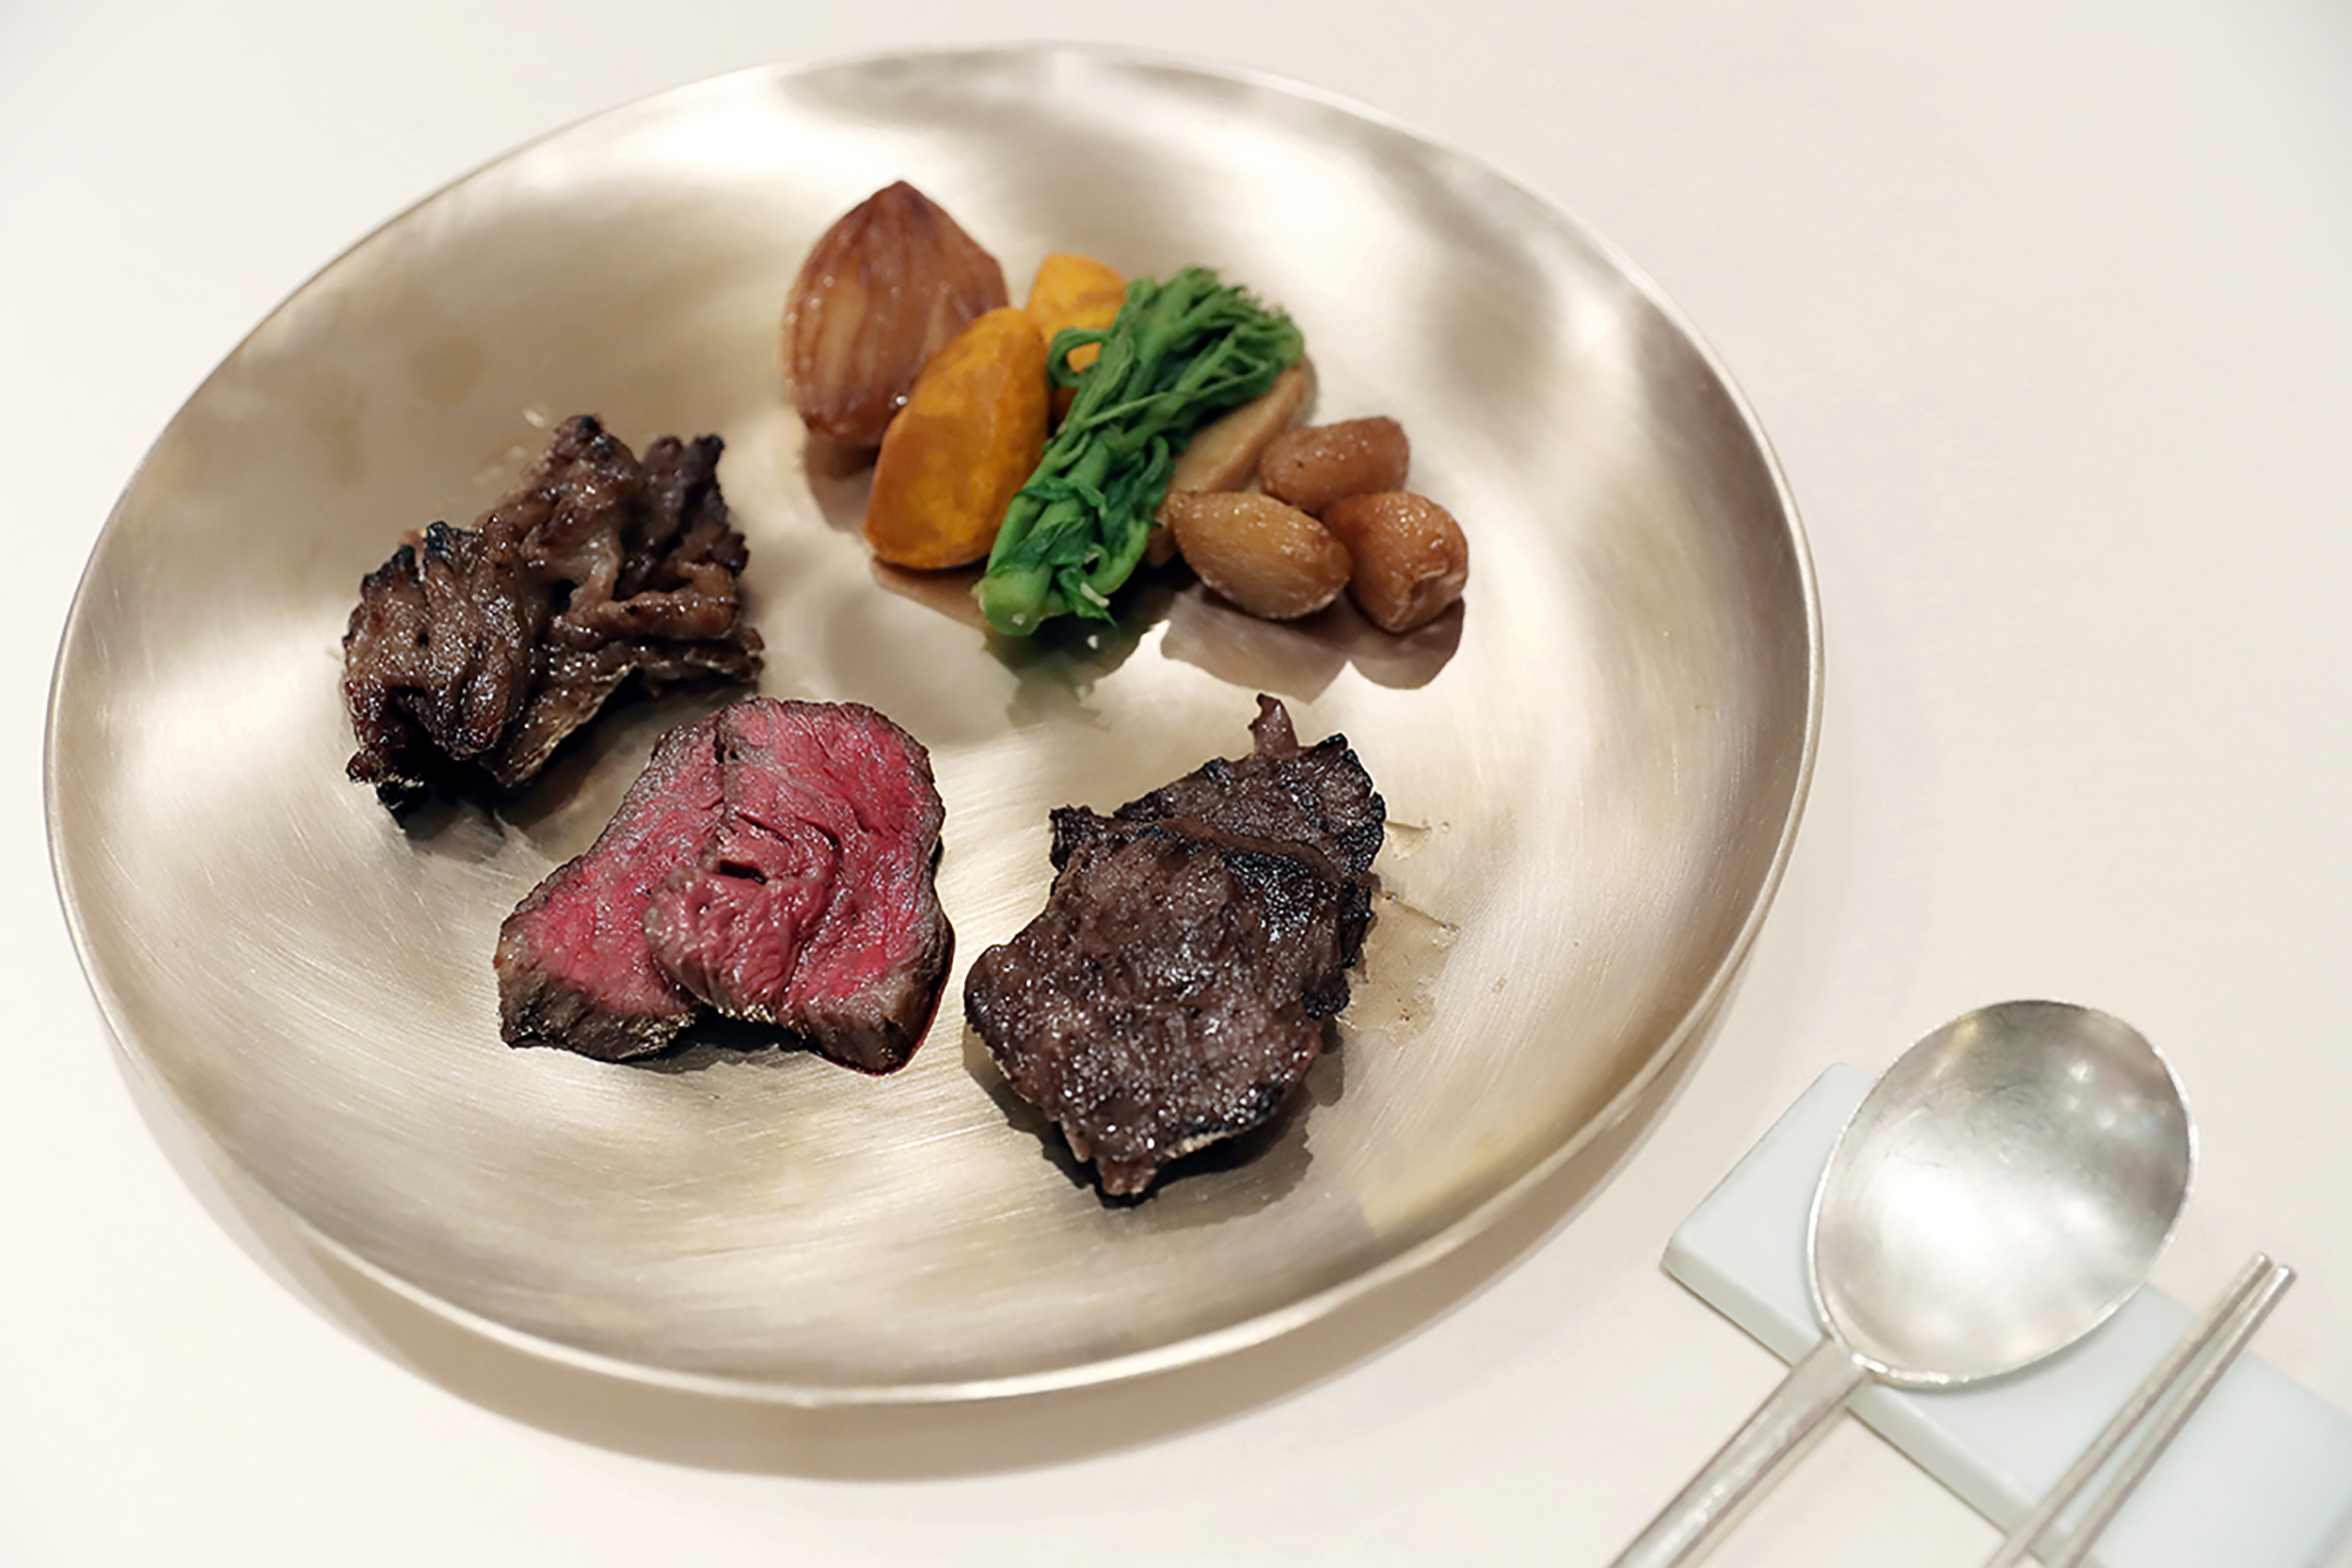 PHOTO: Roasted Korean beef is one of the dishes which will be served at the dinner of the upcoming inter-Korean summit.